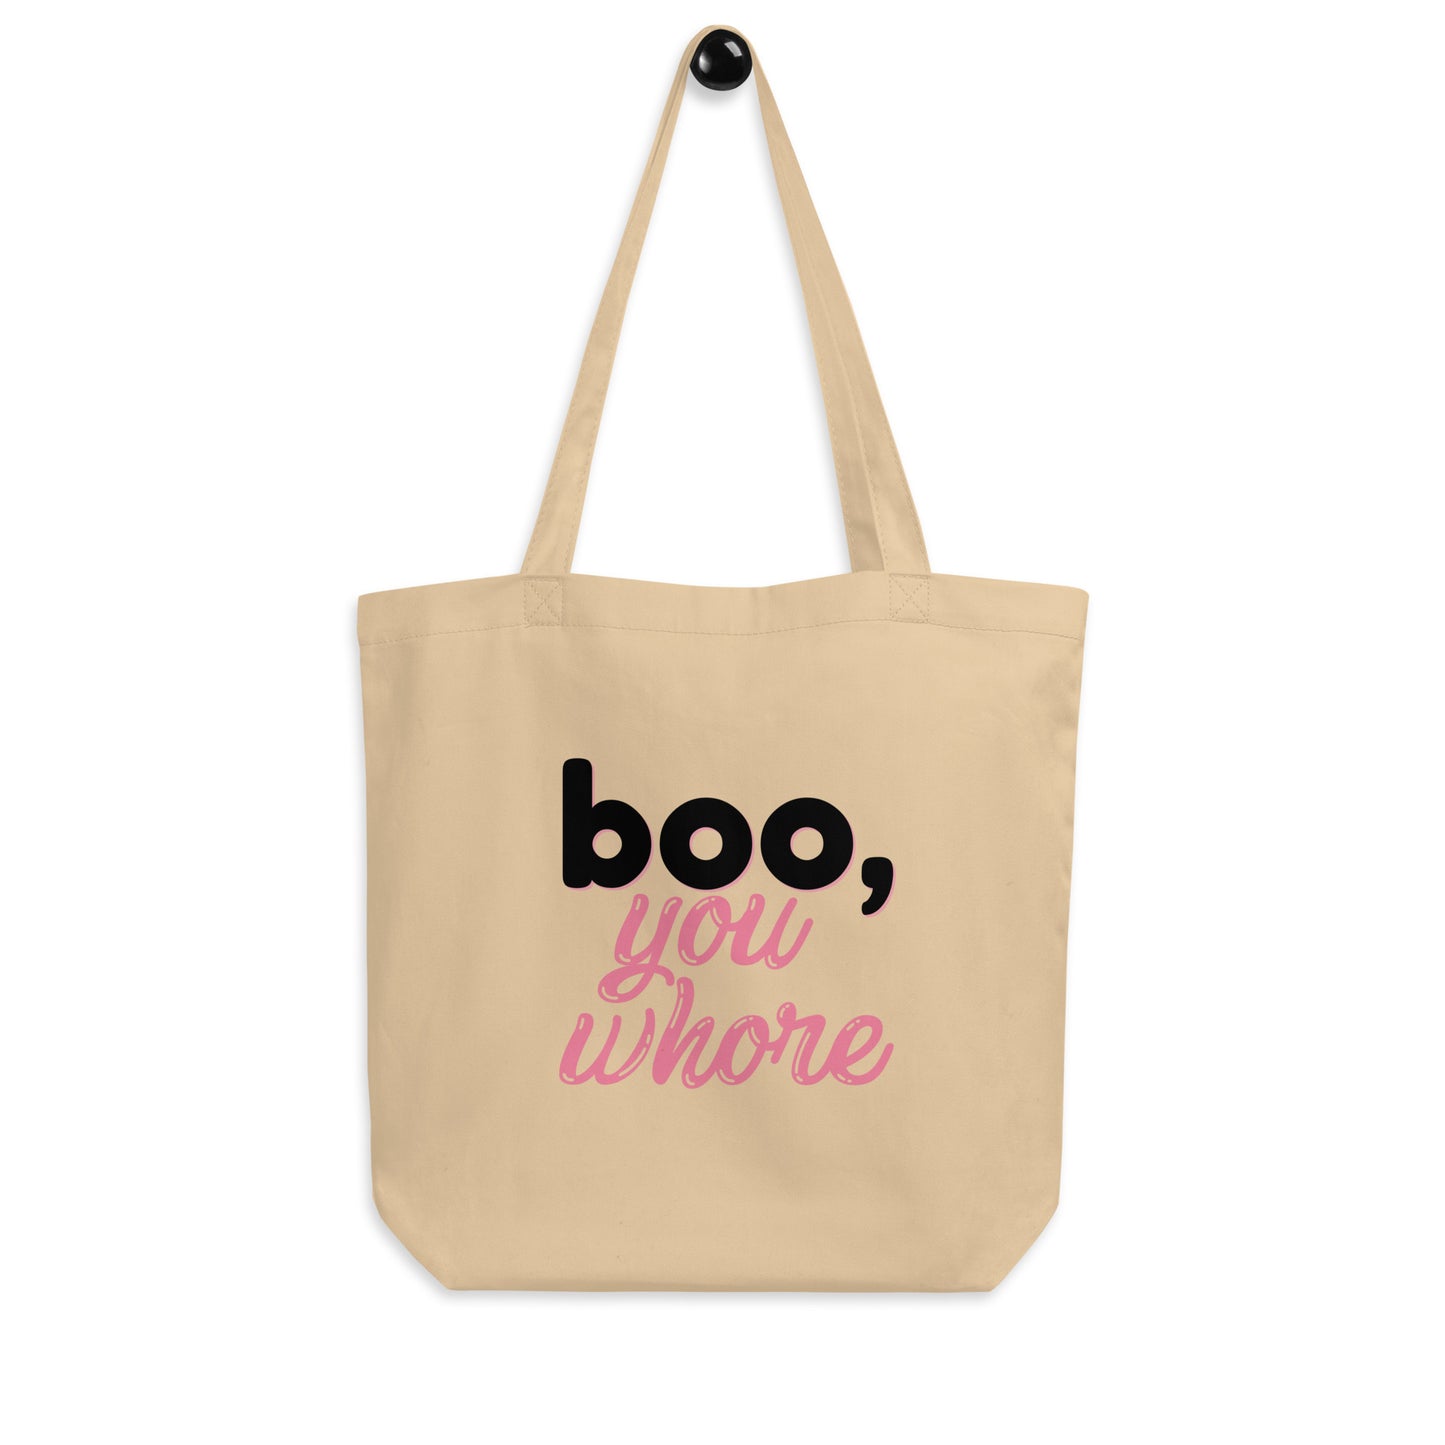 Mean Girls - Boo you Whore Tote